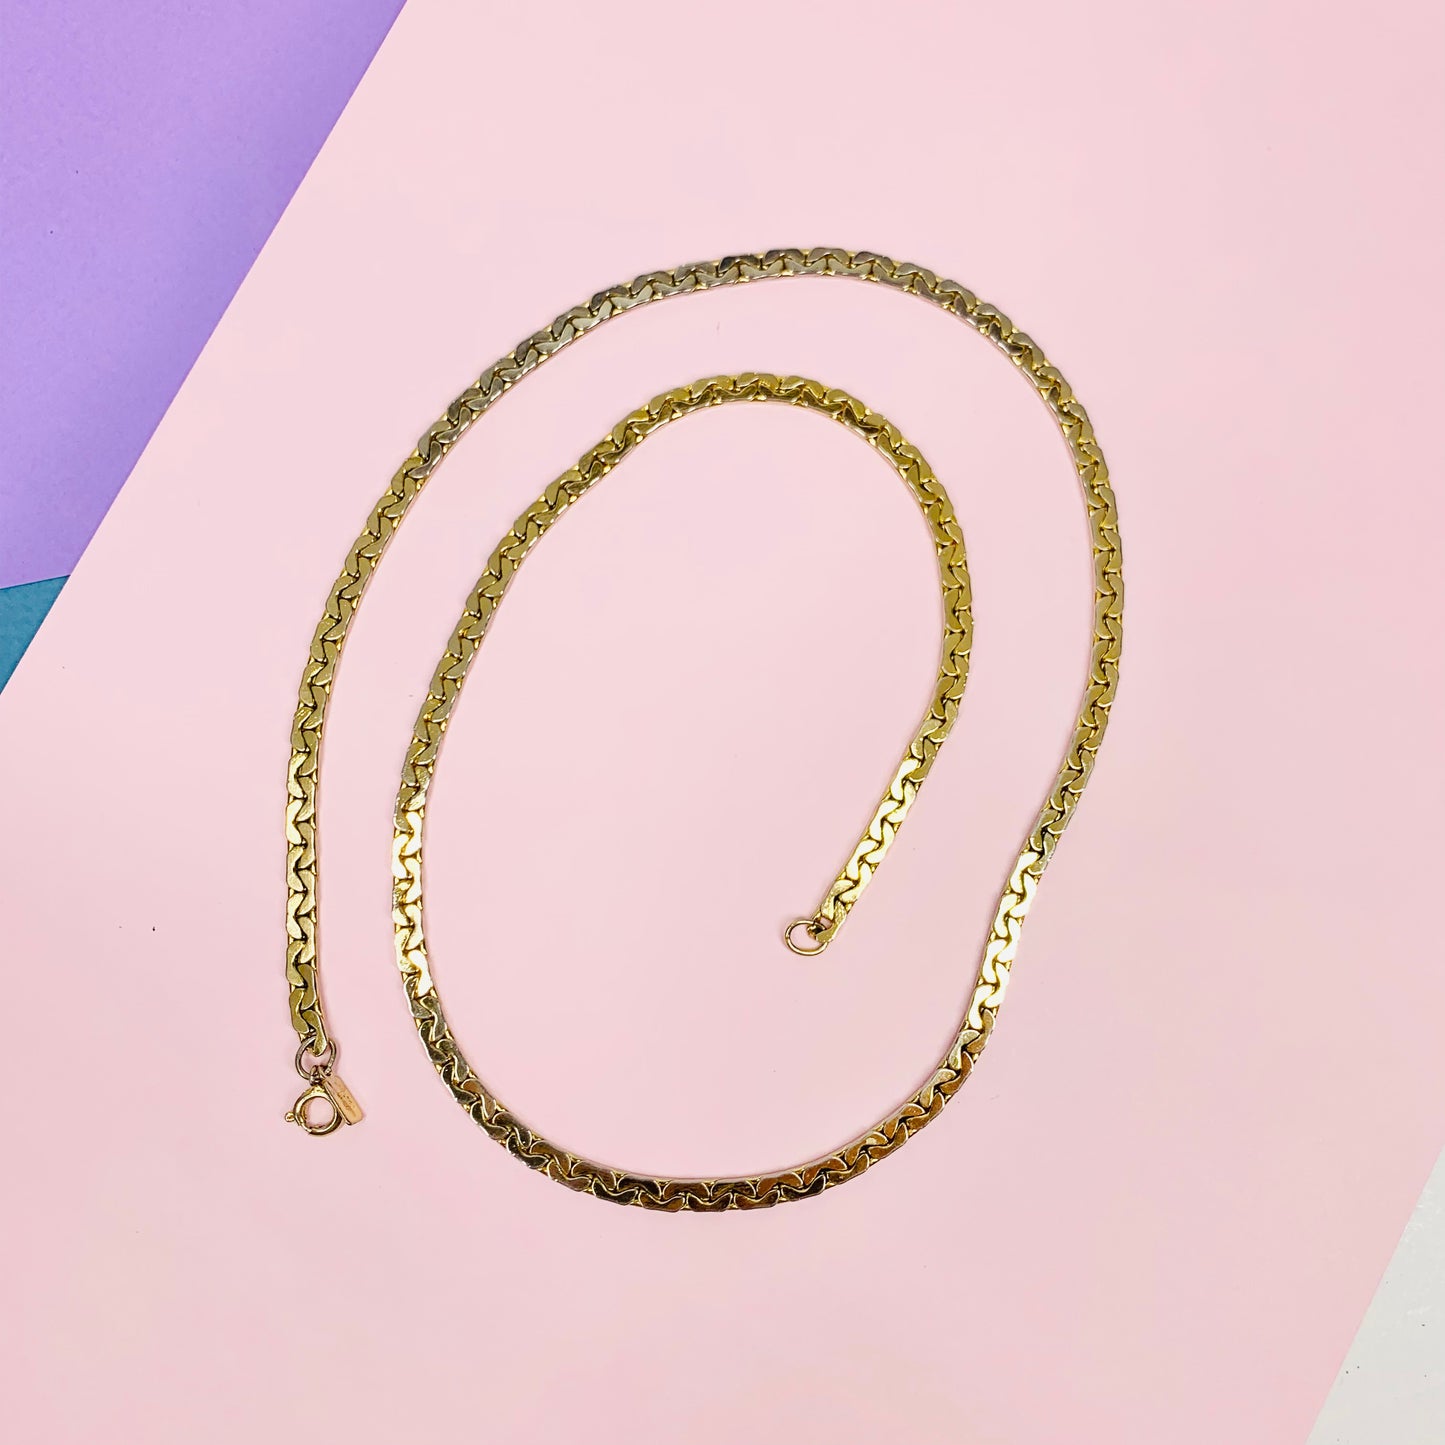 Extremely rare 1970s Artisan ultra rolled gold long chain